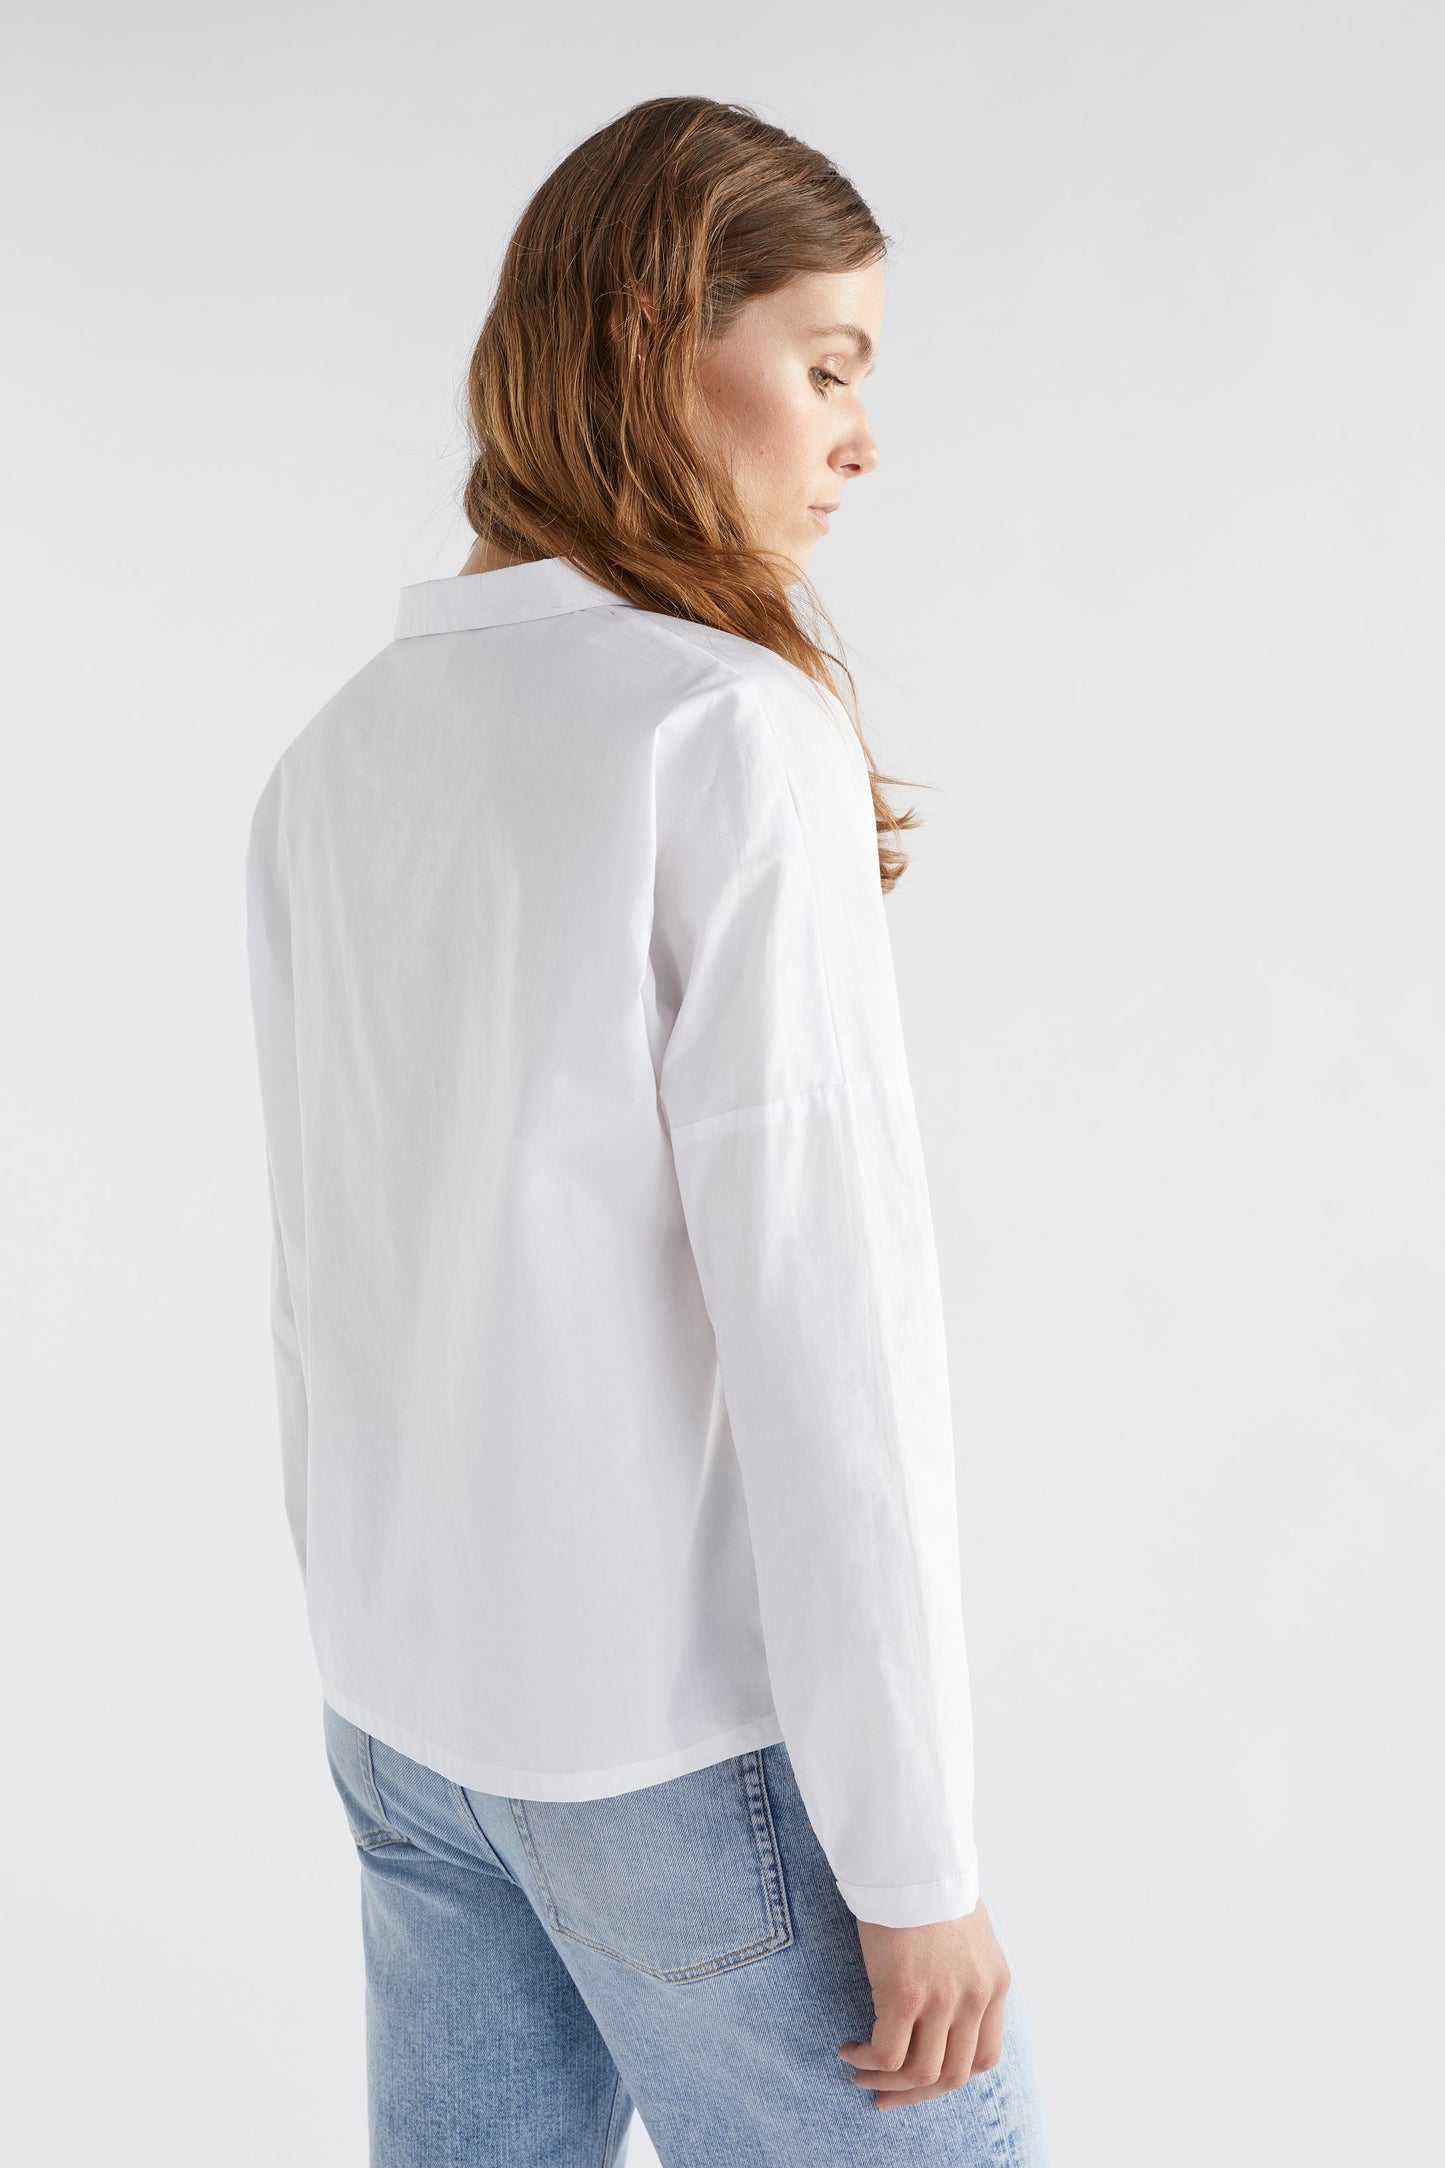 Rinna Organic Cotton White Everyday Shirt with Front Pocket Model Back  | WHITE